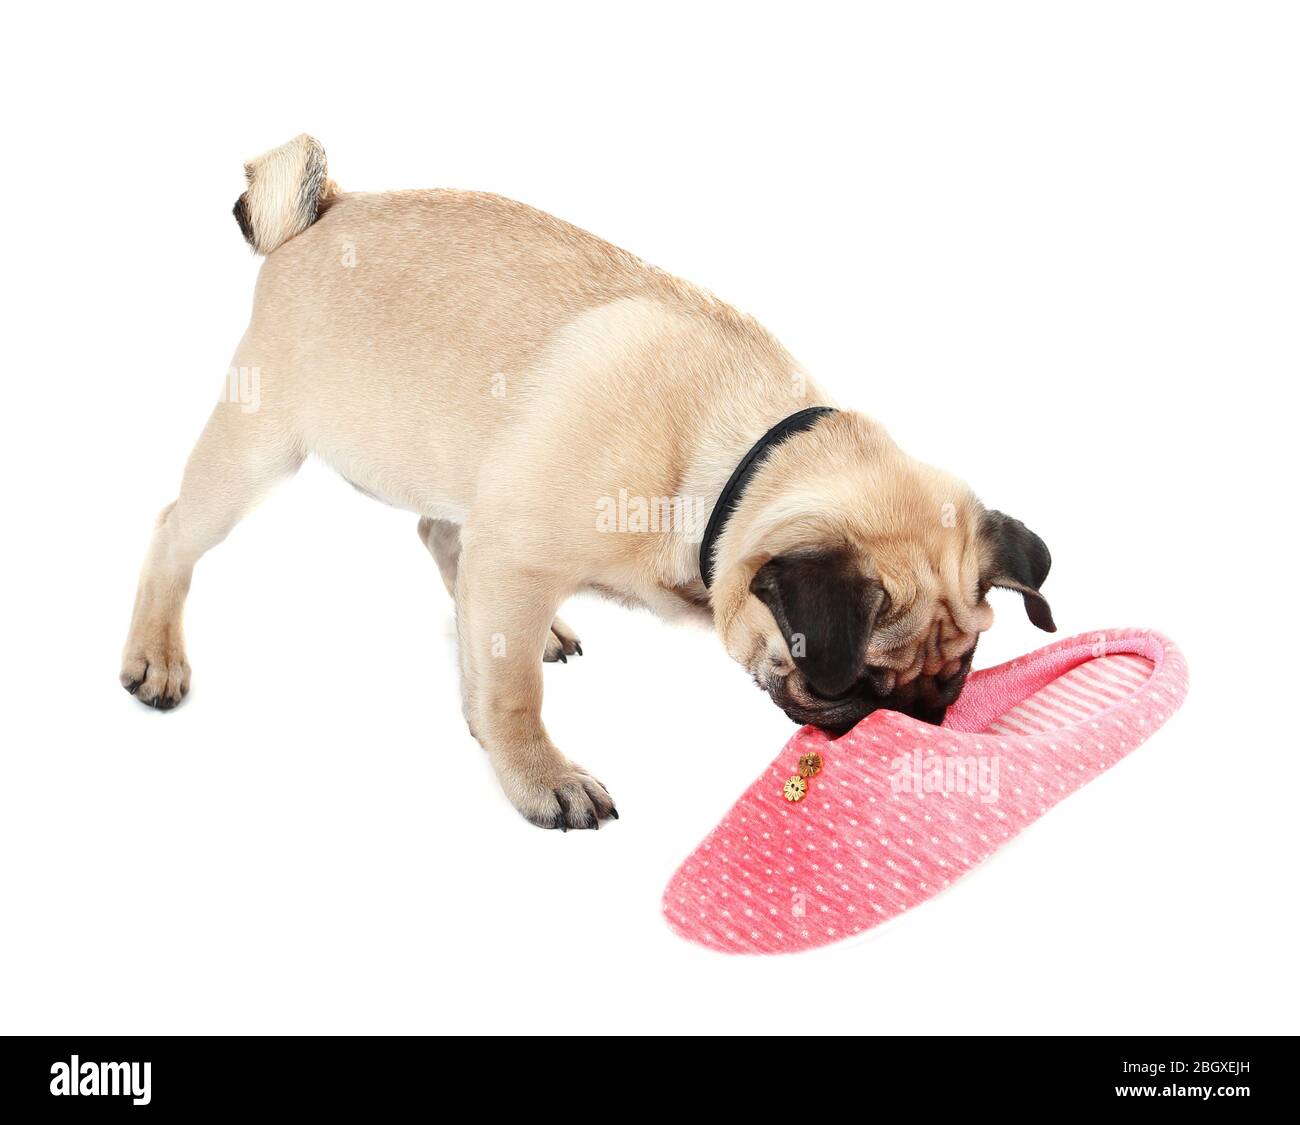 Funny, cute and playful pug dog with slipper isolated on white Stock Photo